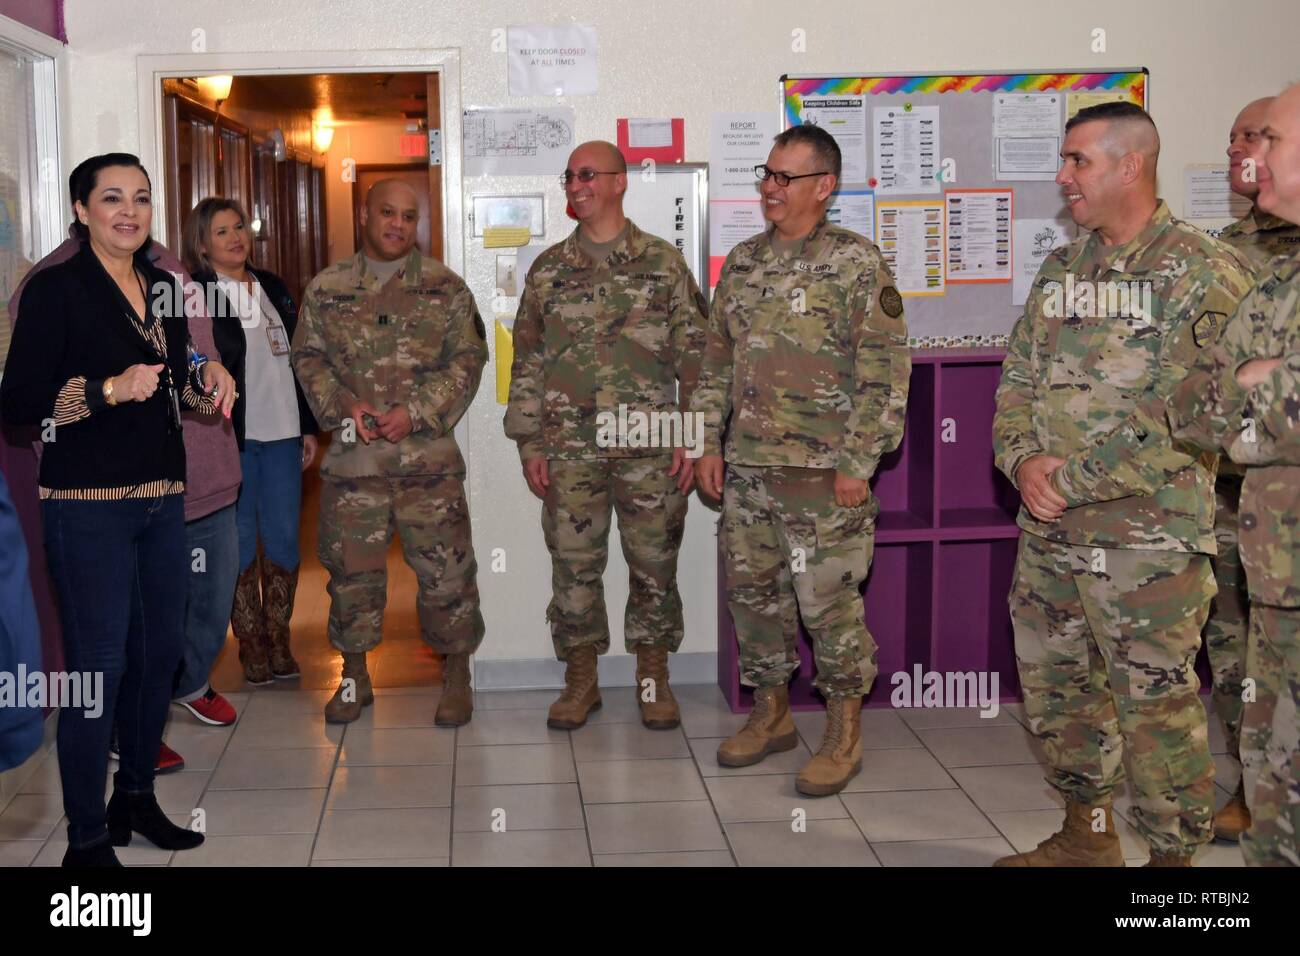 EL PASO, Texas – Army Reserve Soldiers of the 210th Regional Support Group, Aguadilla, Puerto Rico, and the Fort Bliss Garrison Command were honored during an event held at the Child Crisis Center of El Paso, Texas, Feb. 8, 2019. During their tour of duty as part of the Mobilization and Deployment Brigade – Directorate of Plans, Training, Mobilization and Security at Fort Bliss, Texas, the 210th RSG have been instrumental in donating goods and providing services to the CCCEP for the past three months. Furthermore, 210th RSG Soldiers volunteered to refurbish and restore five of the children’s r Stock Photo